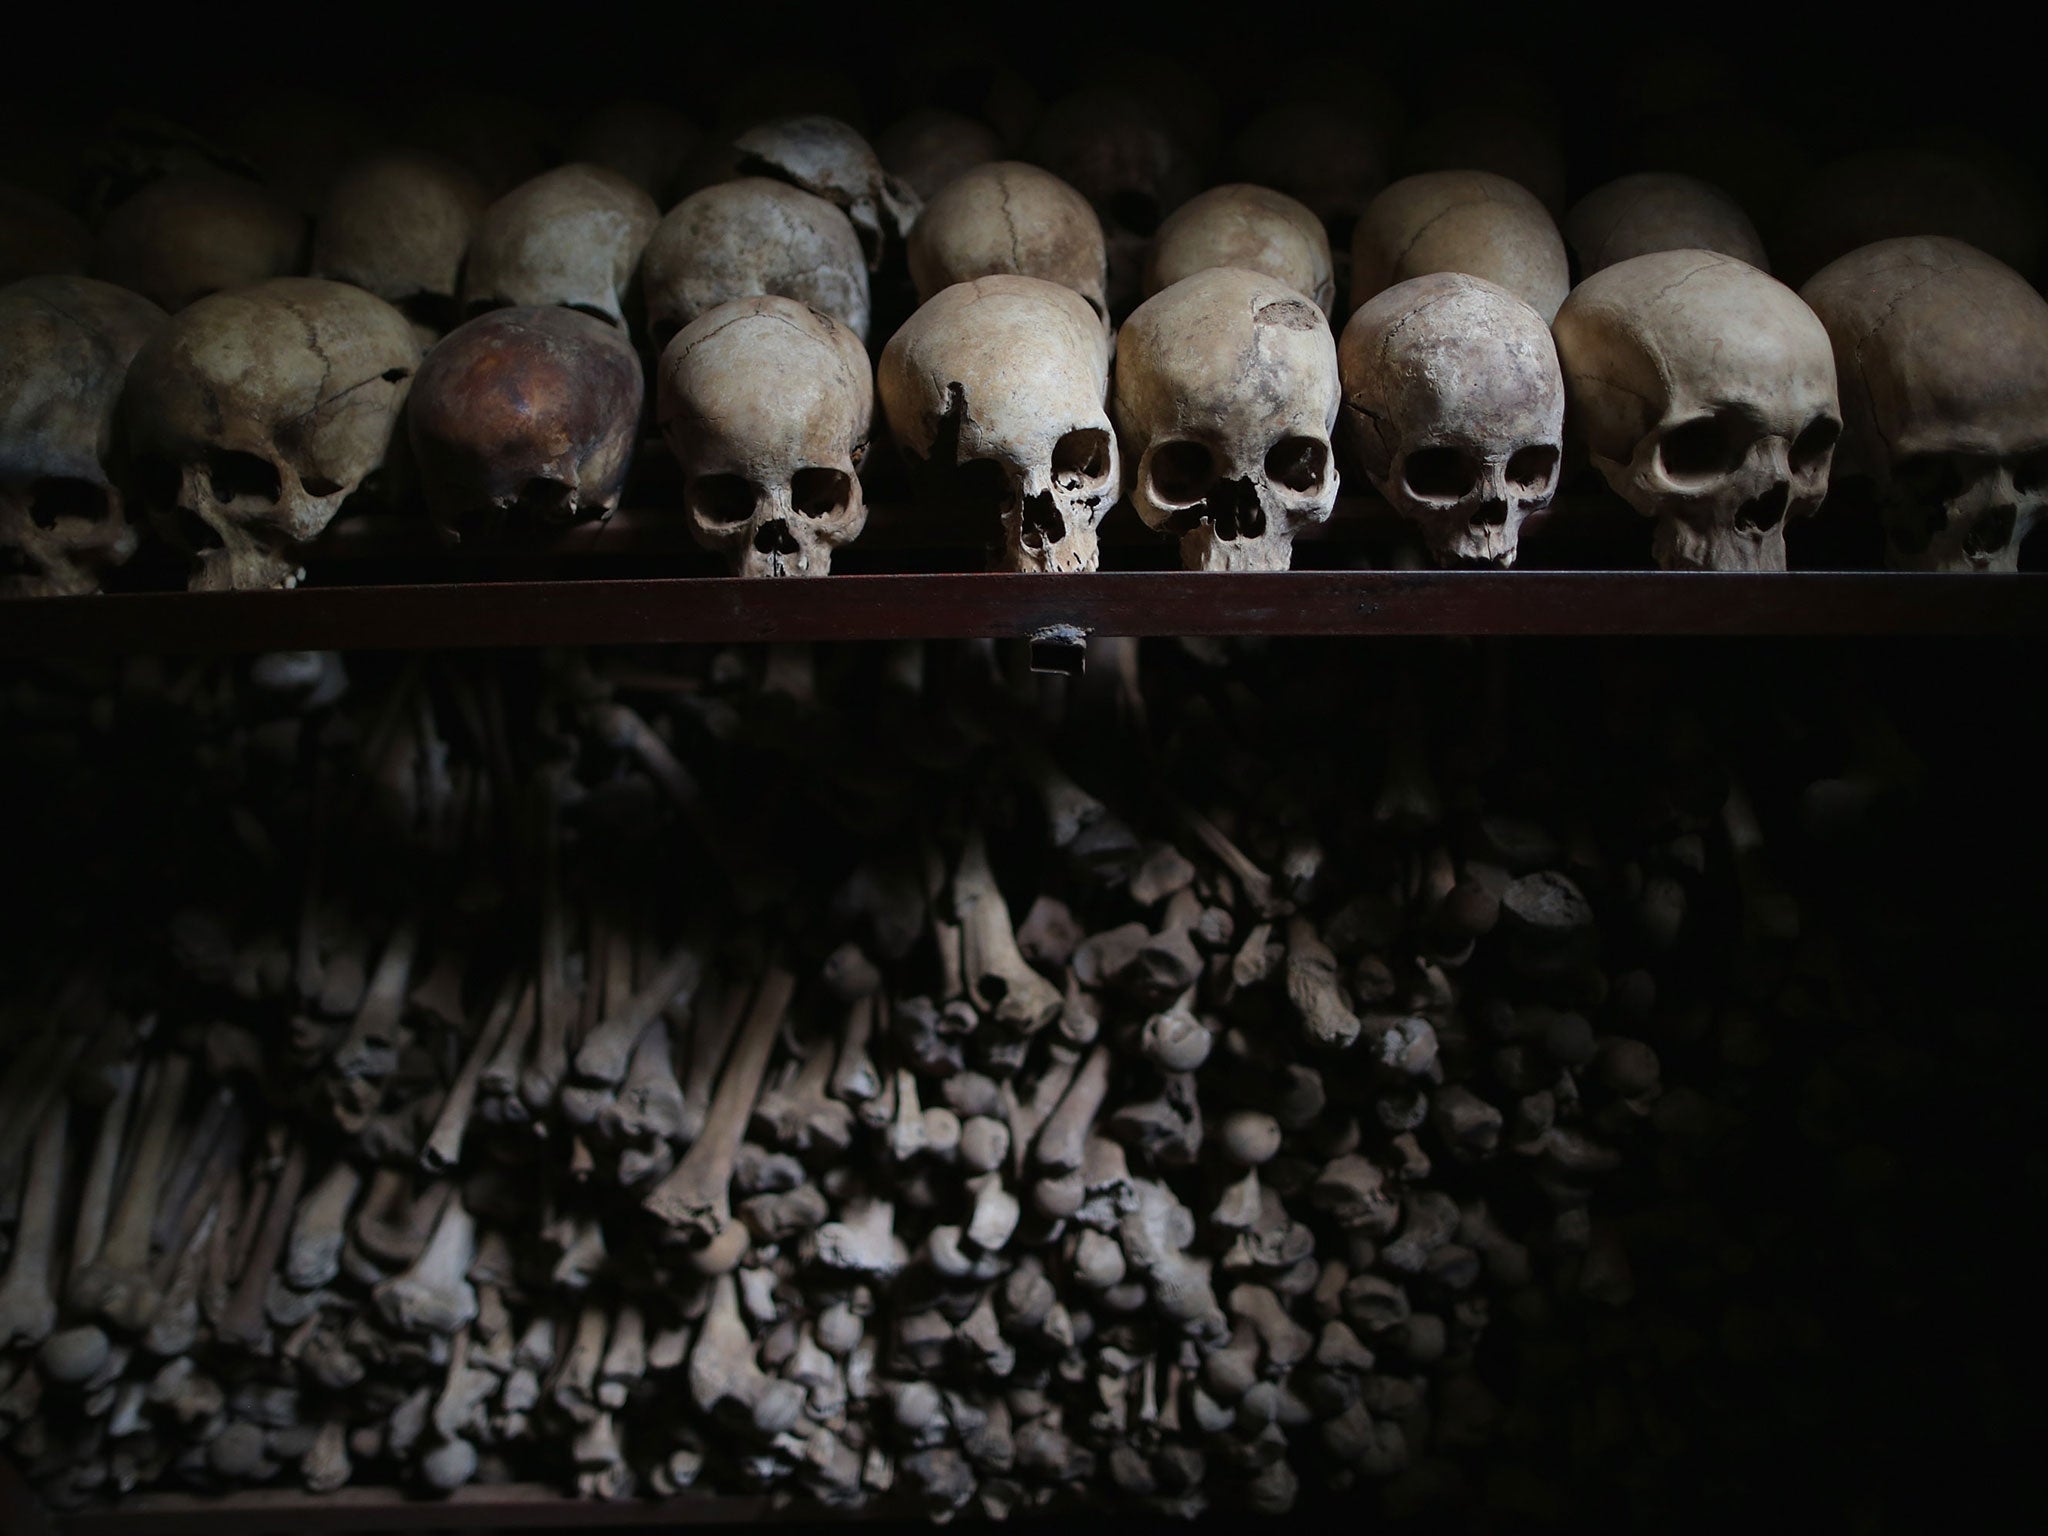 Metal racks hold the bones of thousands of Rwandan Genocide victims inside one of the crypts at the Nyamata Catholic Church